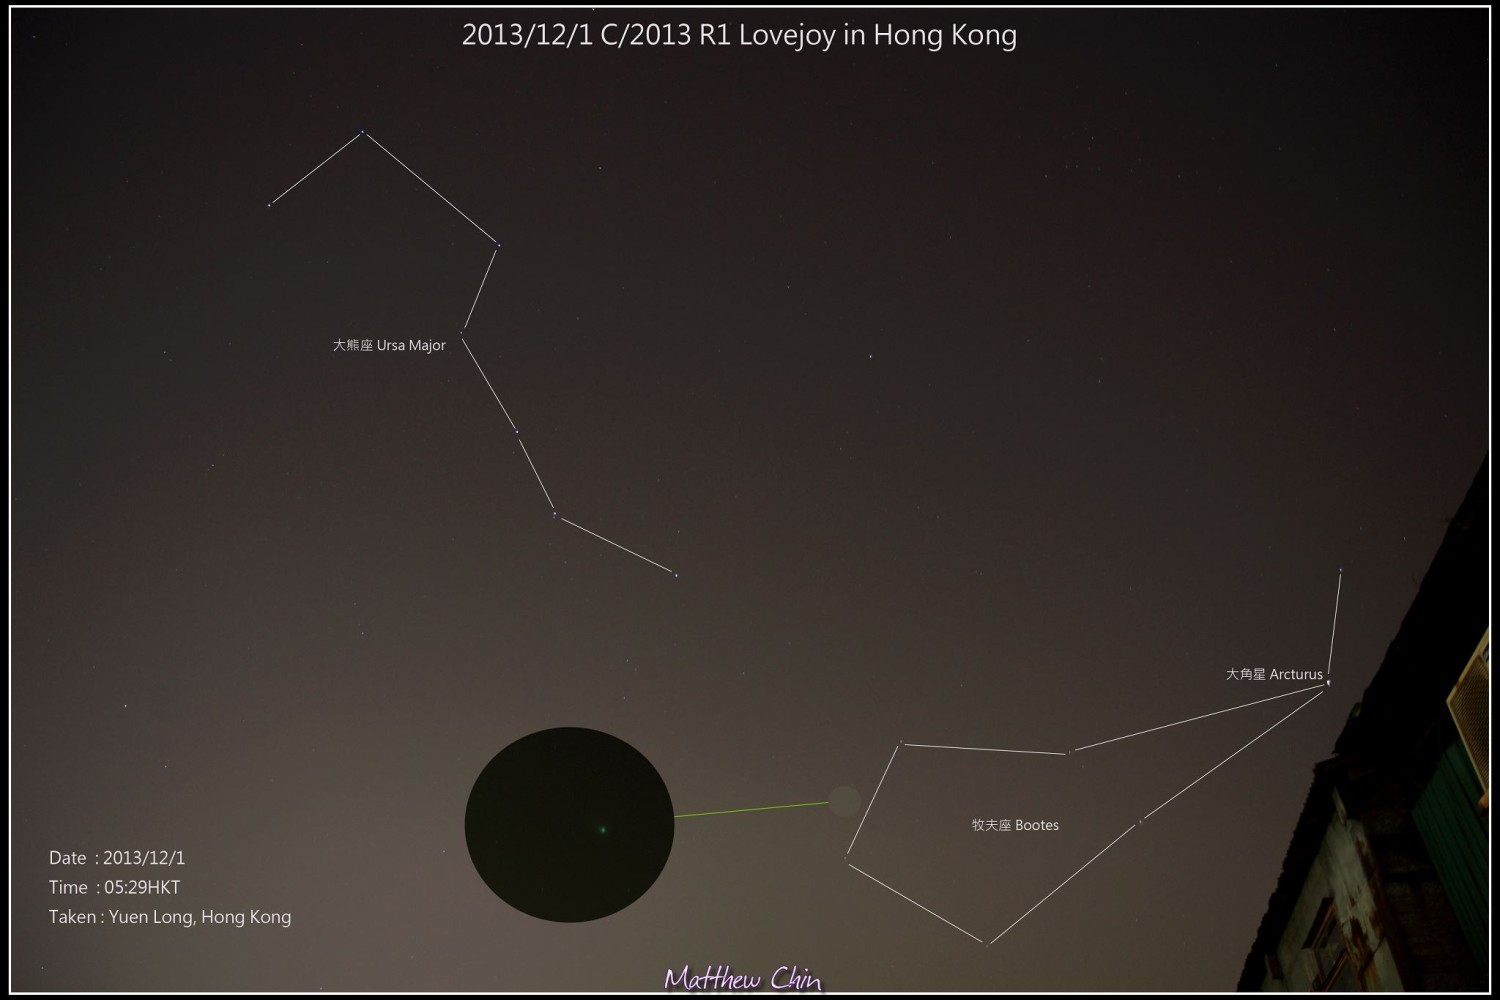 View larger. | Here is Comet Lovejoy on the morning of December 1, 2013 as captured by EarthSky Facebook friend Matthew Chin in Hong Kong. Thanks, Matthew! The comet was seen at this location on the sky's dome from around the entire Earth on December 1. 